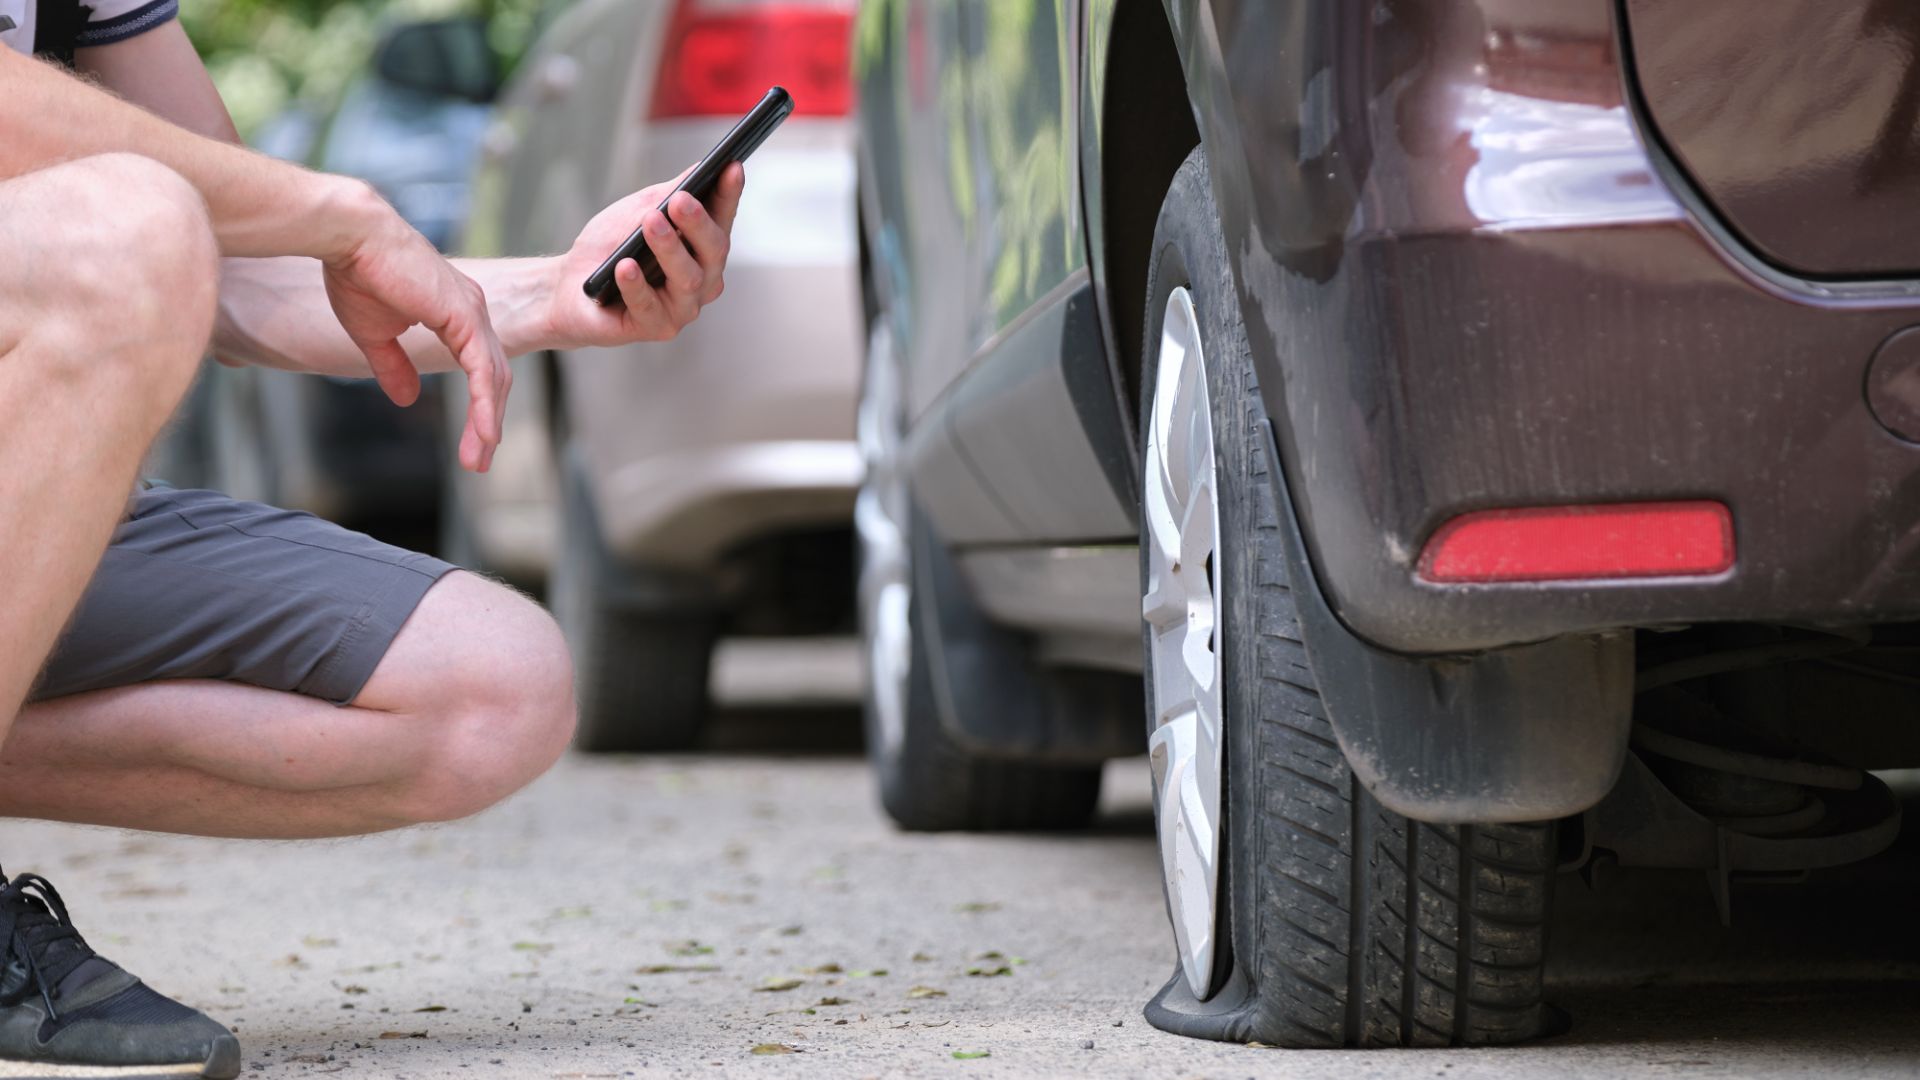 a man kneeling down next to a car holding a cell phone.